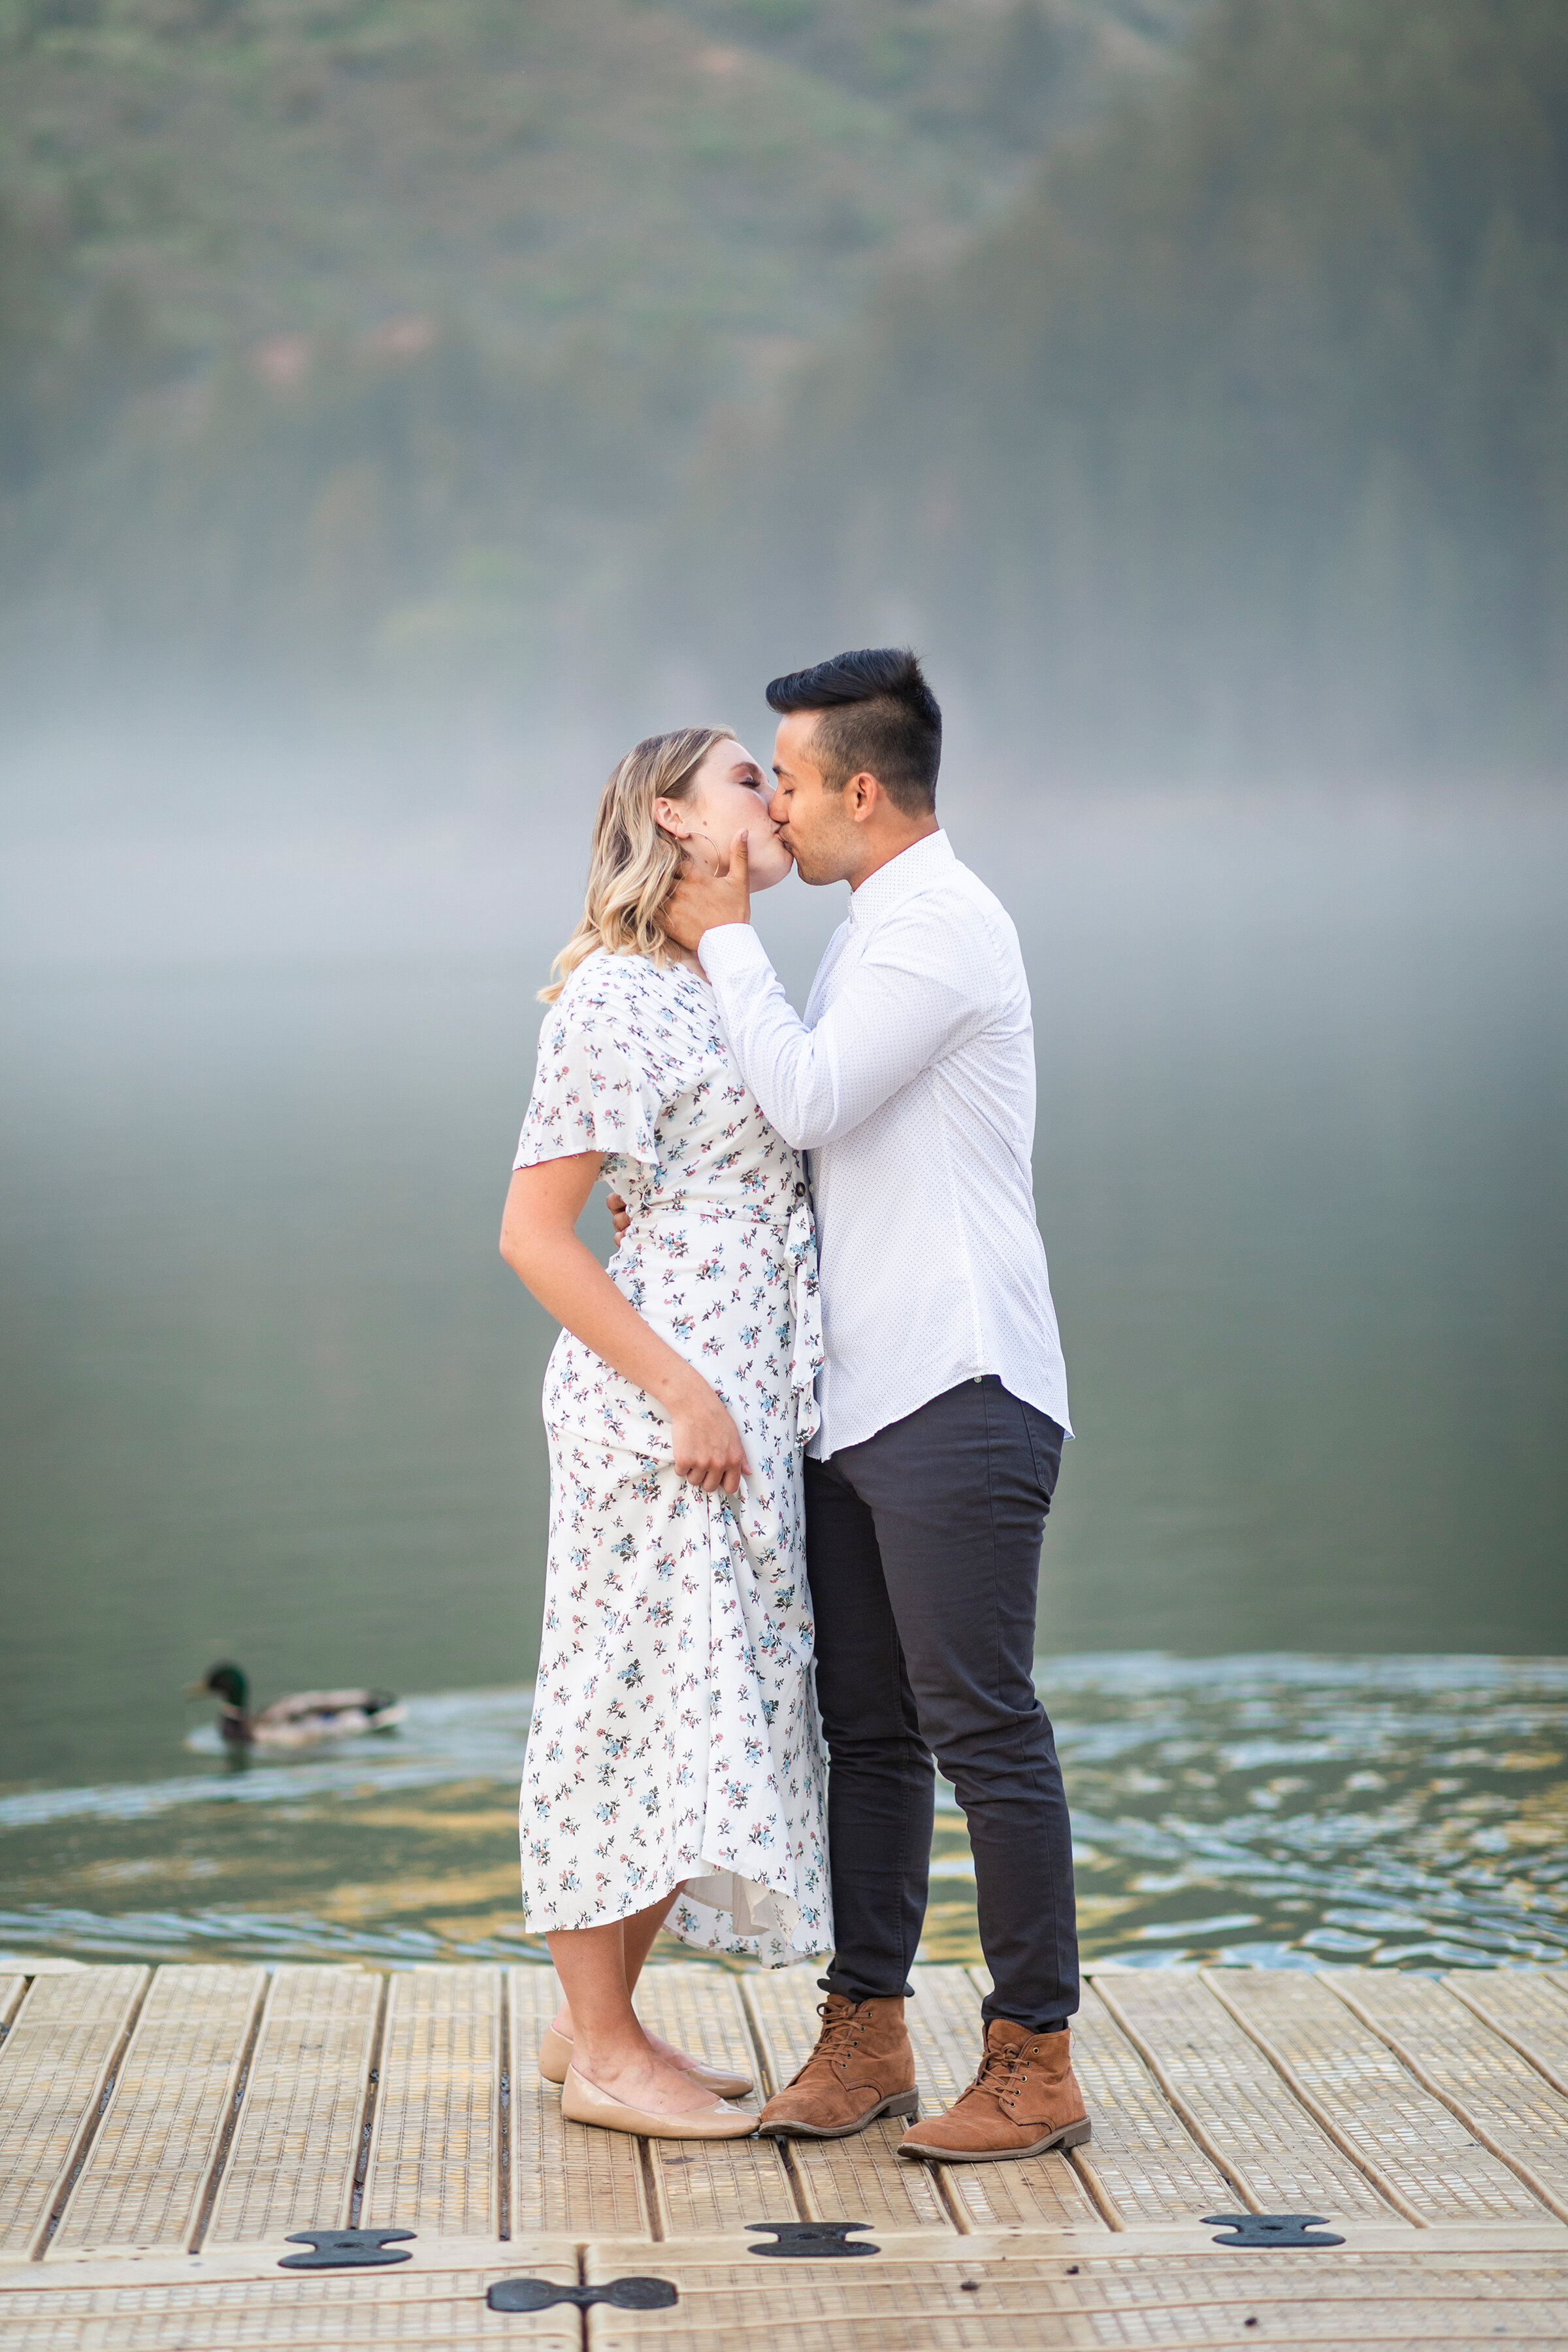  Ideas for Beautiful Engagement Photo Locations in Northern Utah. Clarity Lane Photography wedding advice planning utah brides engagement shoot locations northern Utah photographer #weddingplanning #utahbrides #claritylanephotography #engagementpictu